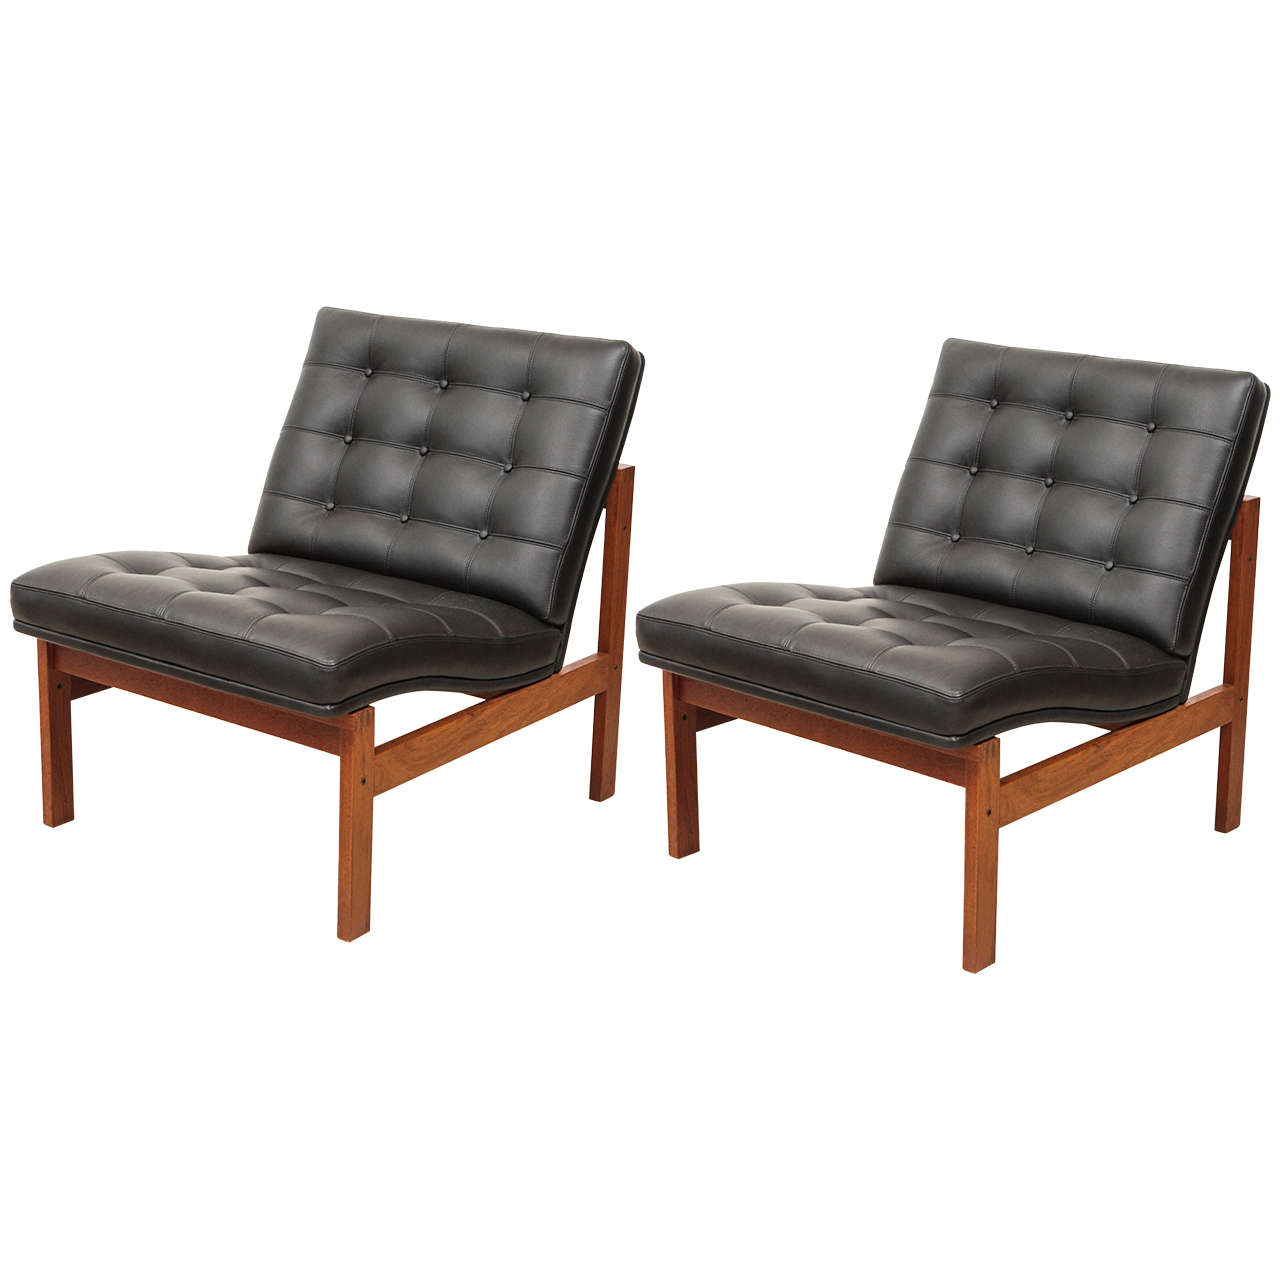 Pair of Armless Lounge Chairs by Ole Gjerløv-Knudsen and Torben Lind